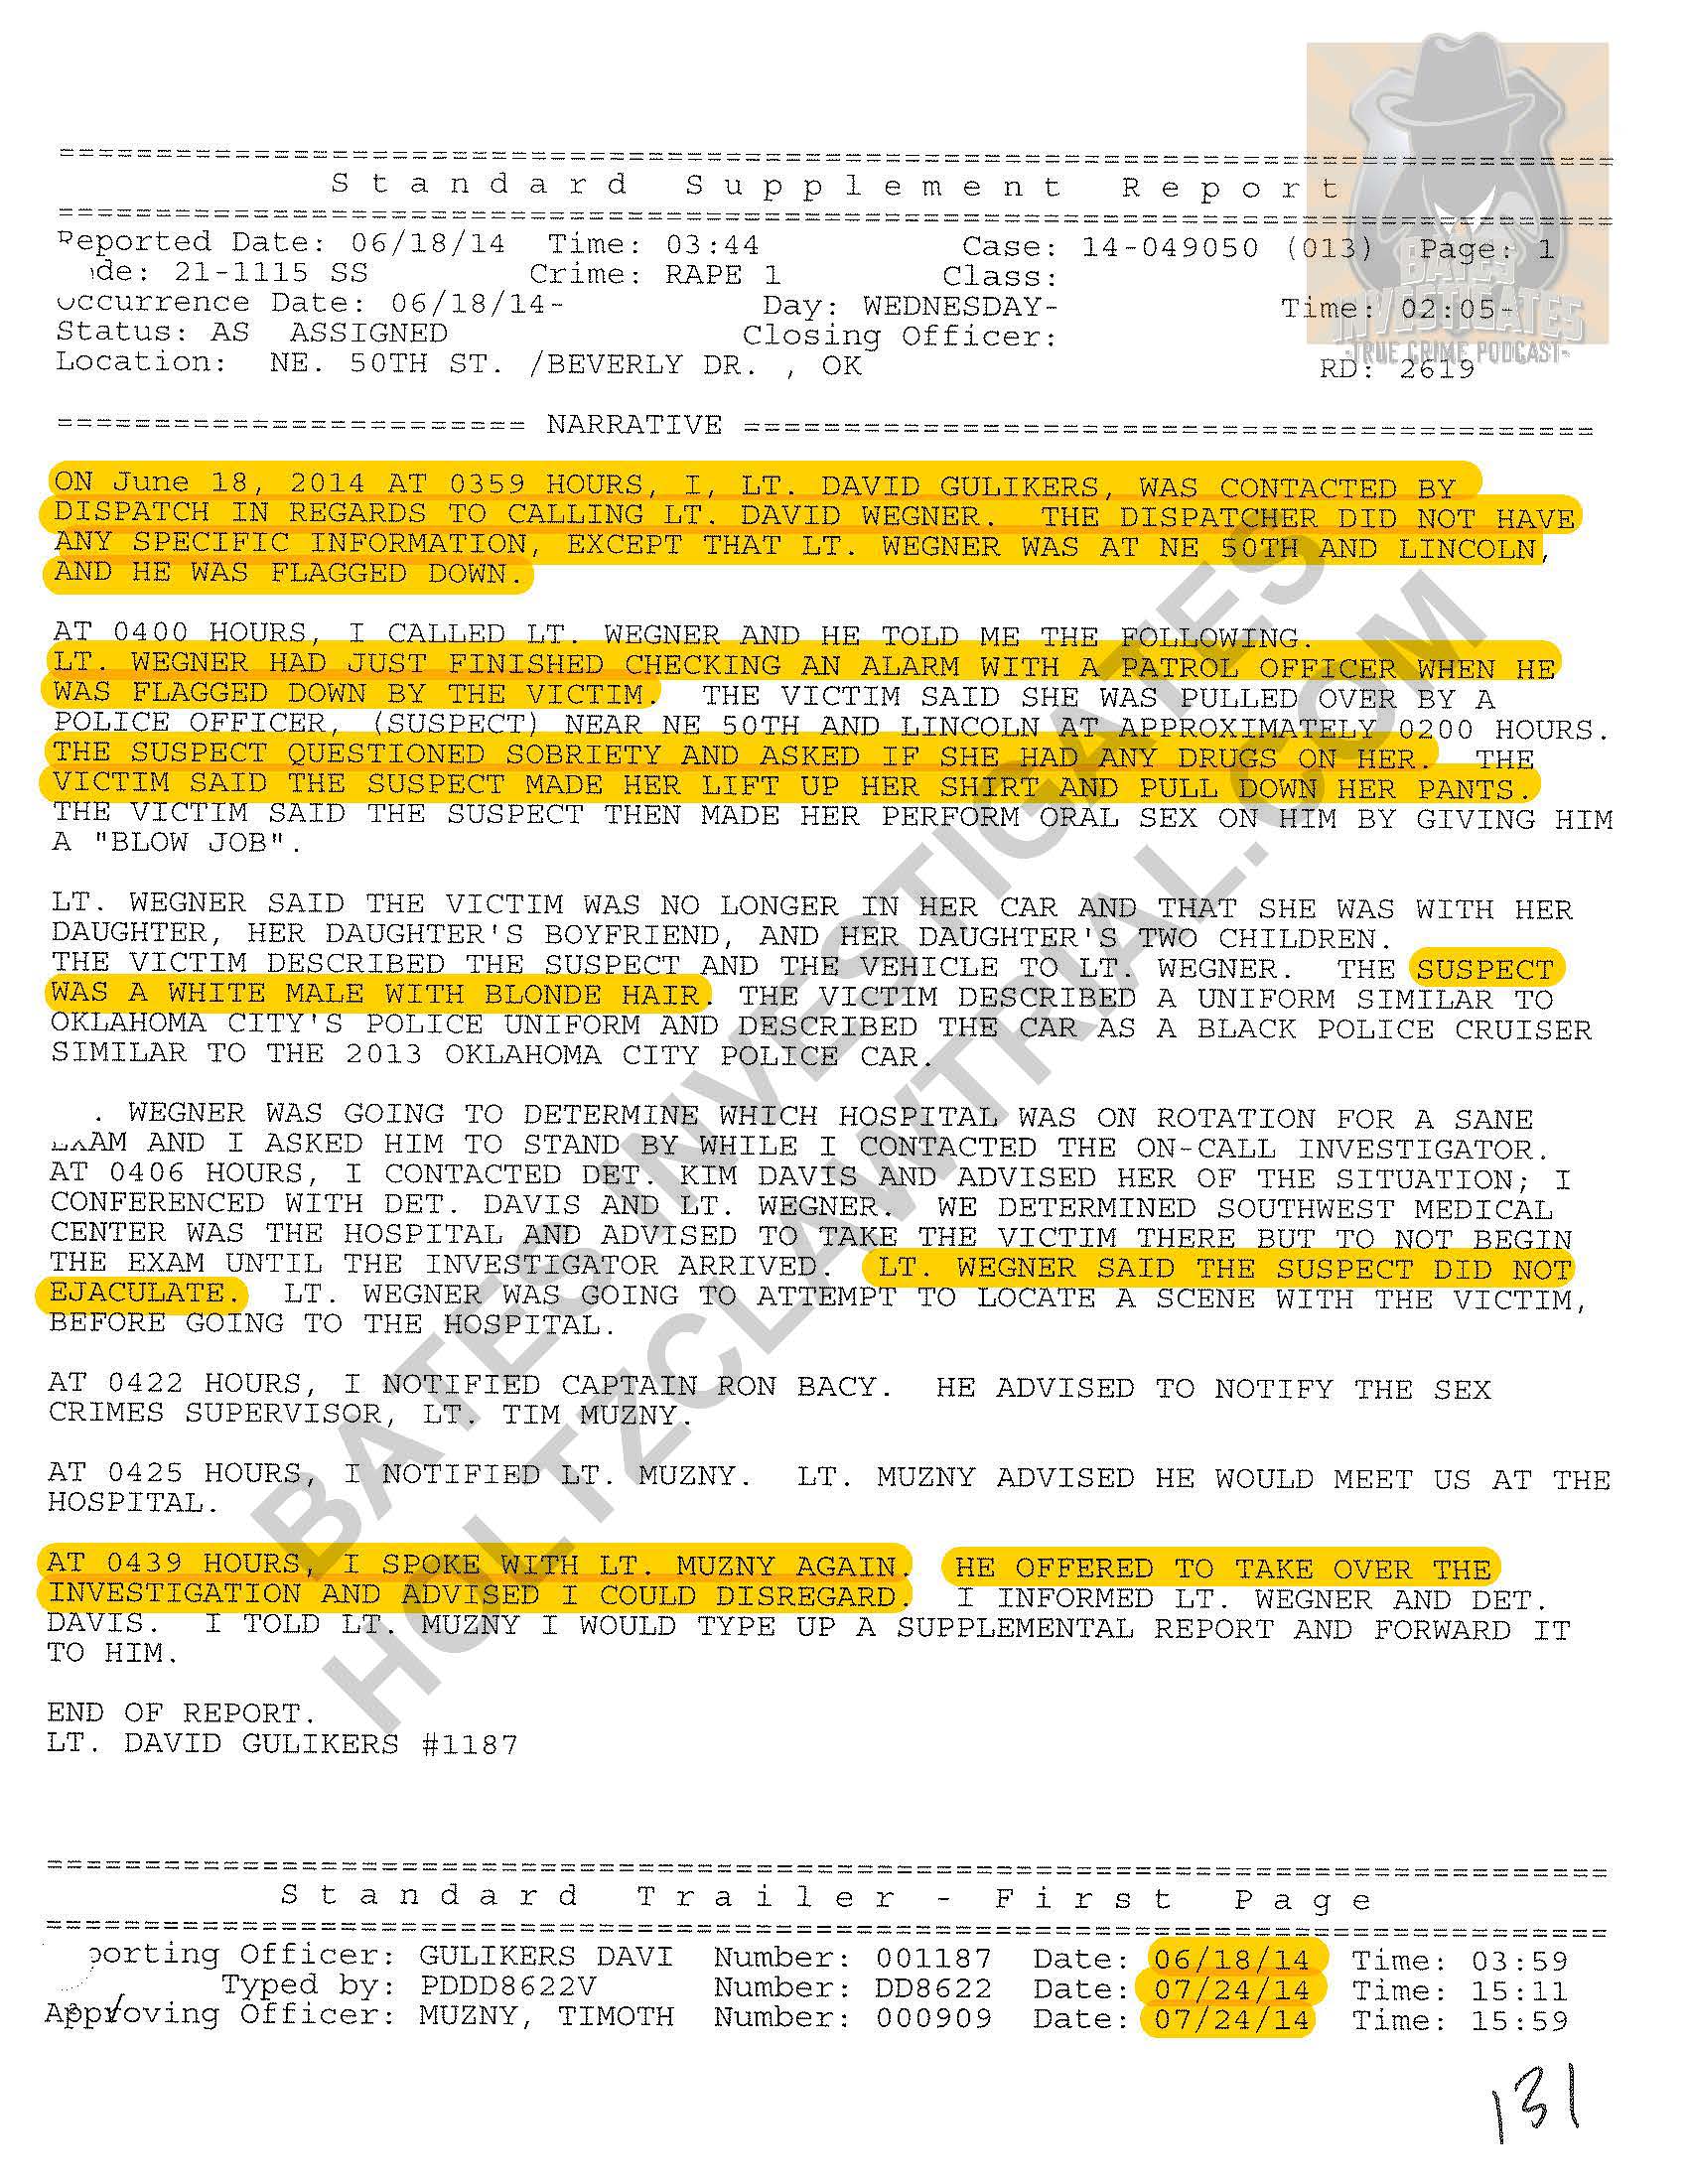 Holtzclaw - Ep02 - Police Reports Watermarked_Page_12.jpg